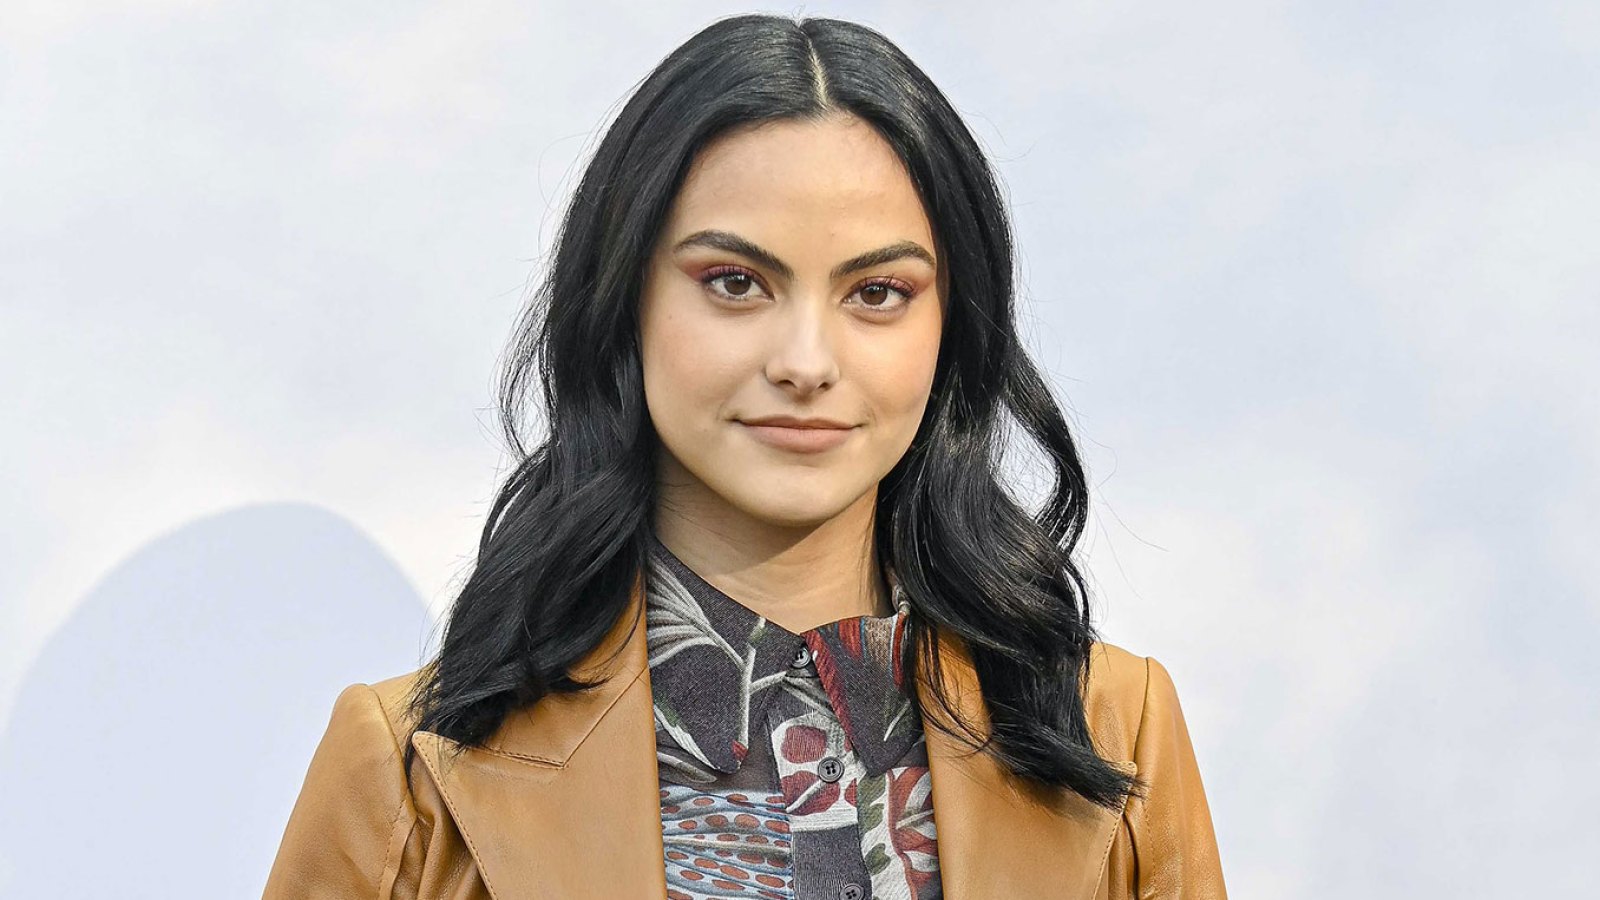 Too Relatable Camila Mendes Ultimate Fashion Inspiration Is The OCs Summer Roberts